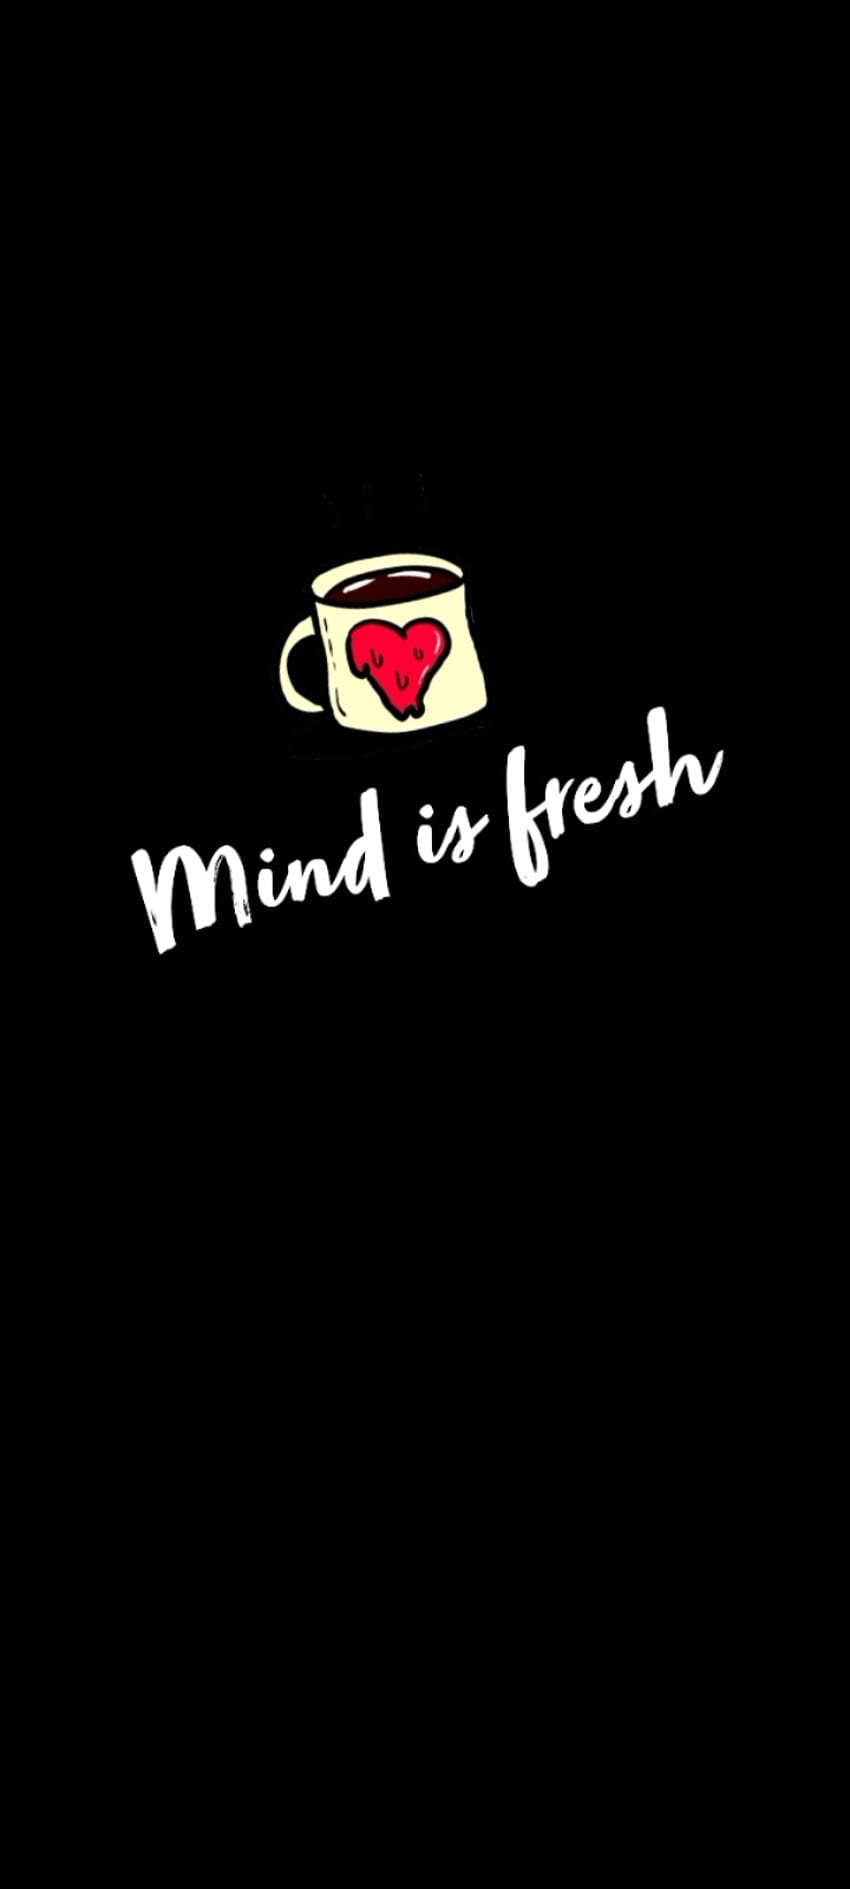 Mind is calm, awesome, typography, top, calm minf, sleeve, feel good, mind games, fresh mind, mind is fresh, vibes HD phone wallpaper